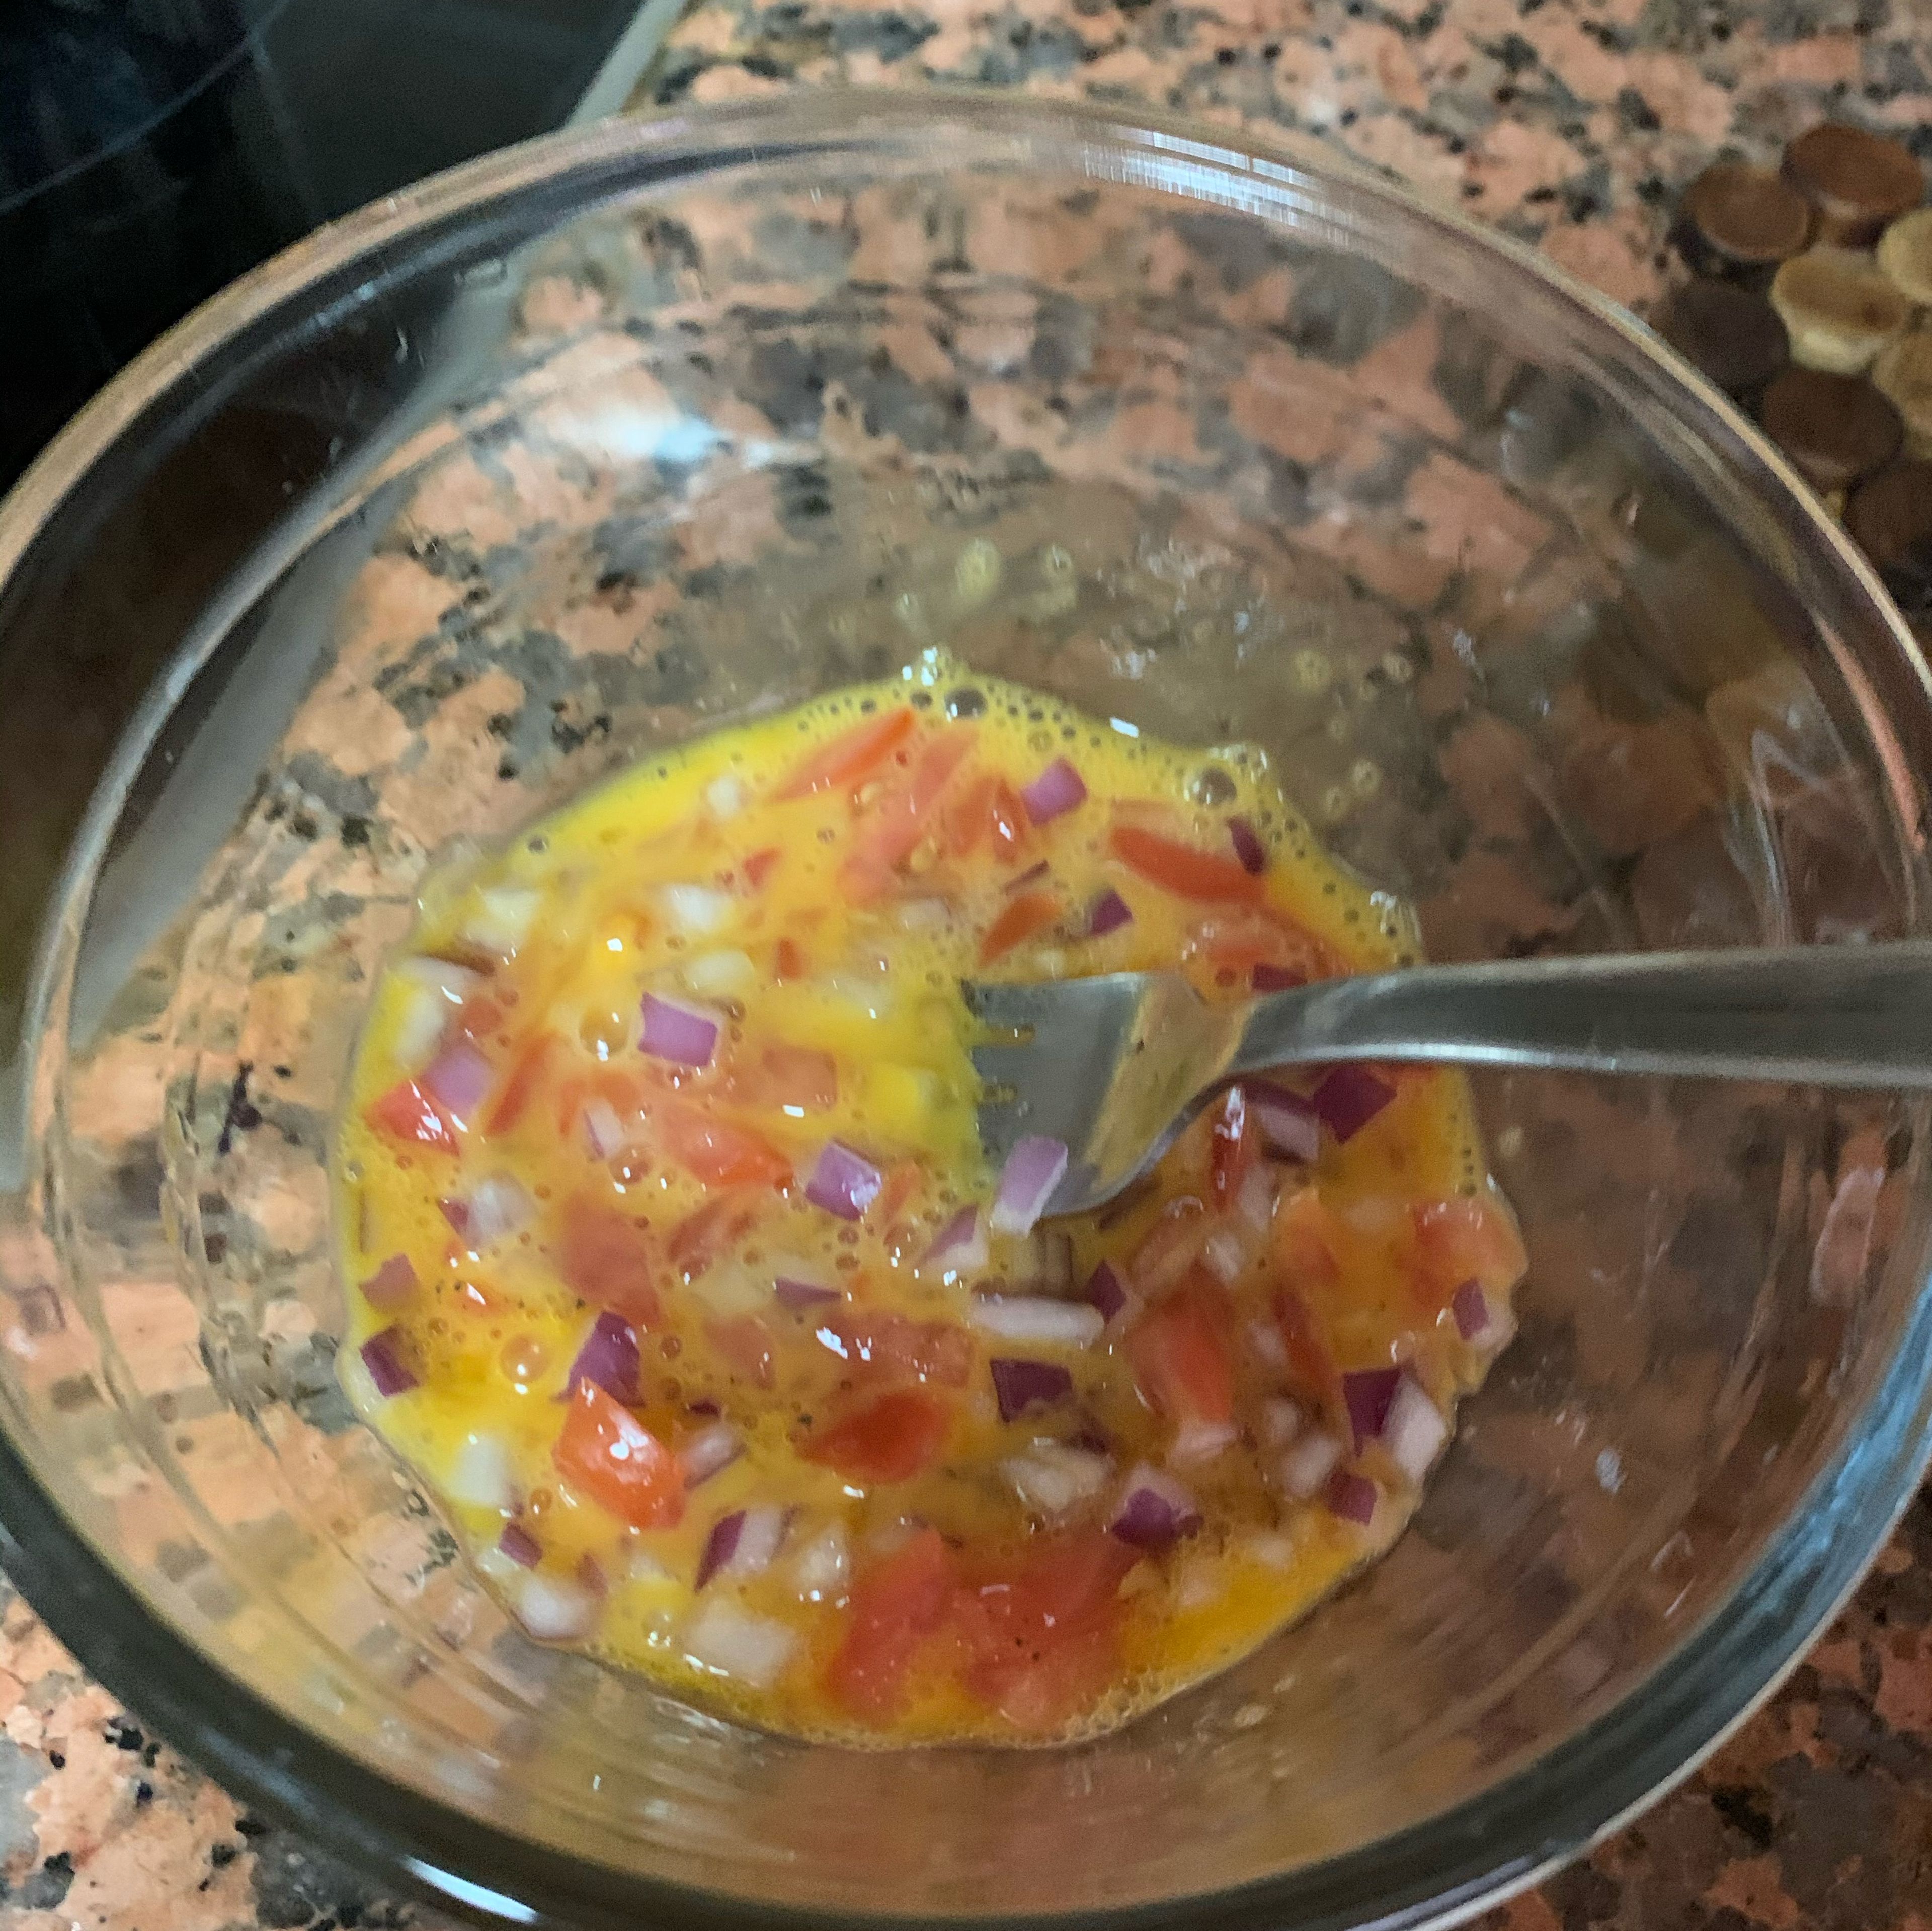 Add the tomato and onion into the whisked egg